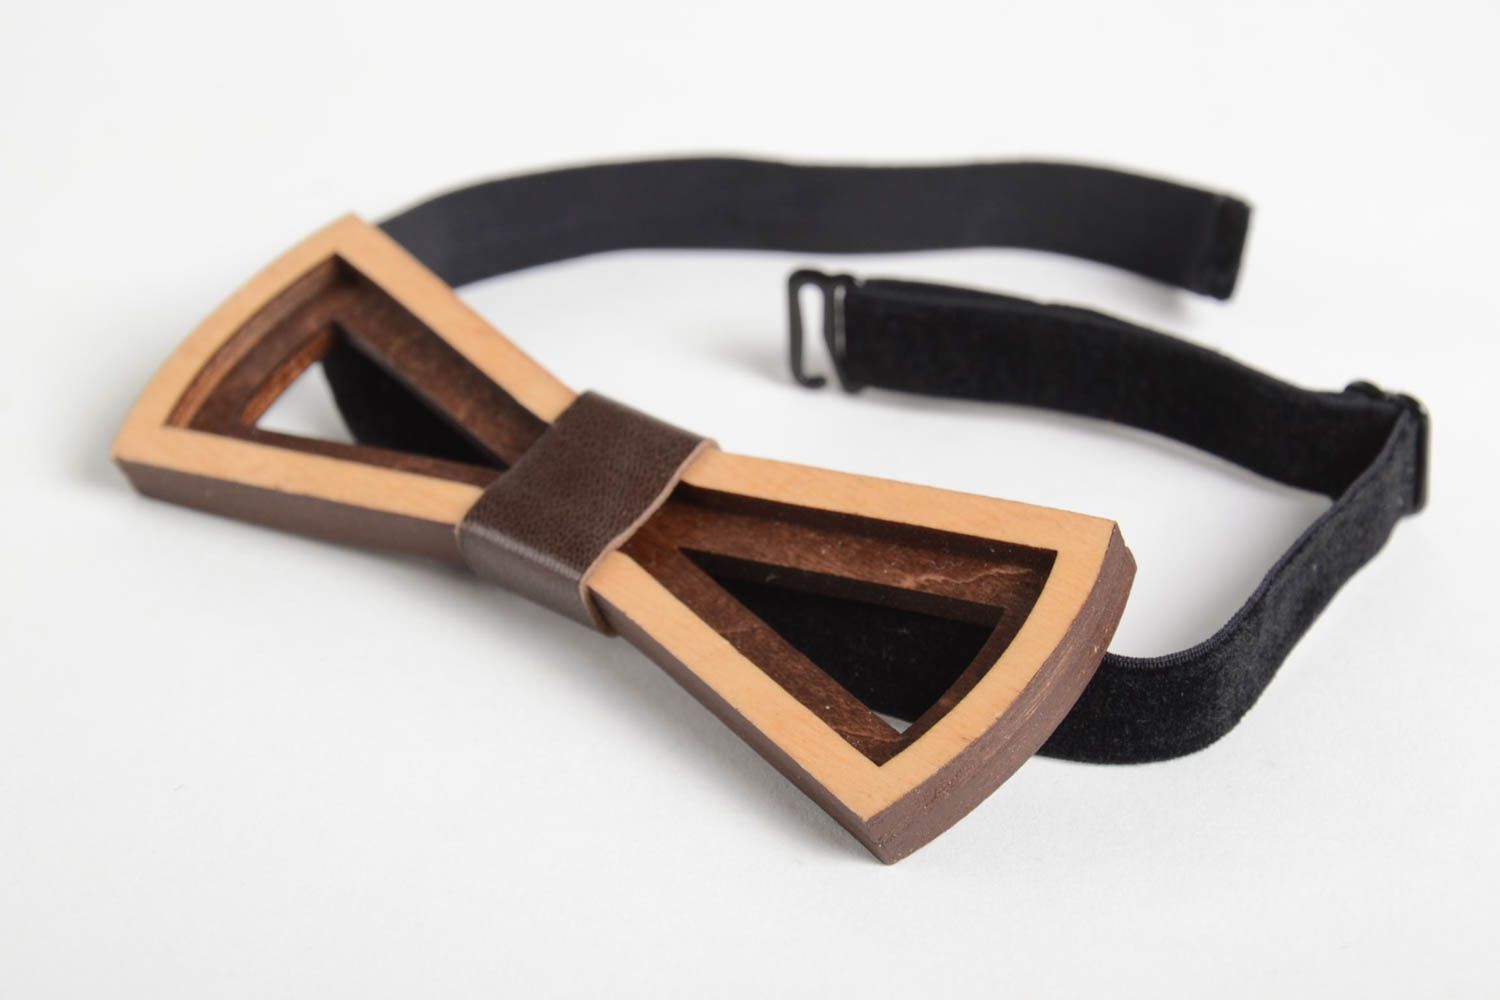 Handmade wooden bow tie fashionable tie wooden bow gift ideas for guys photo 5